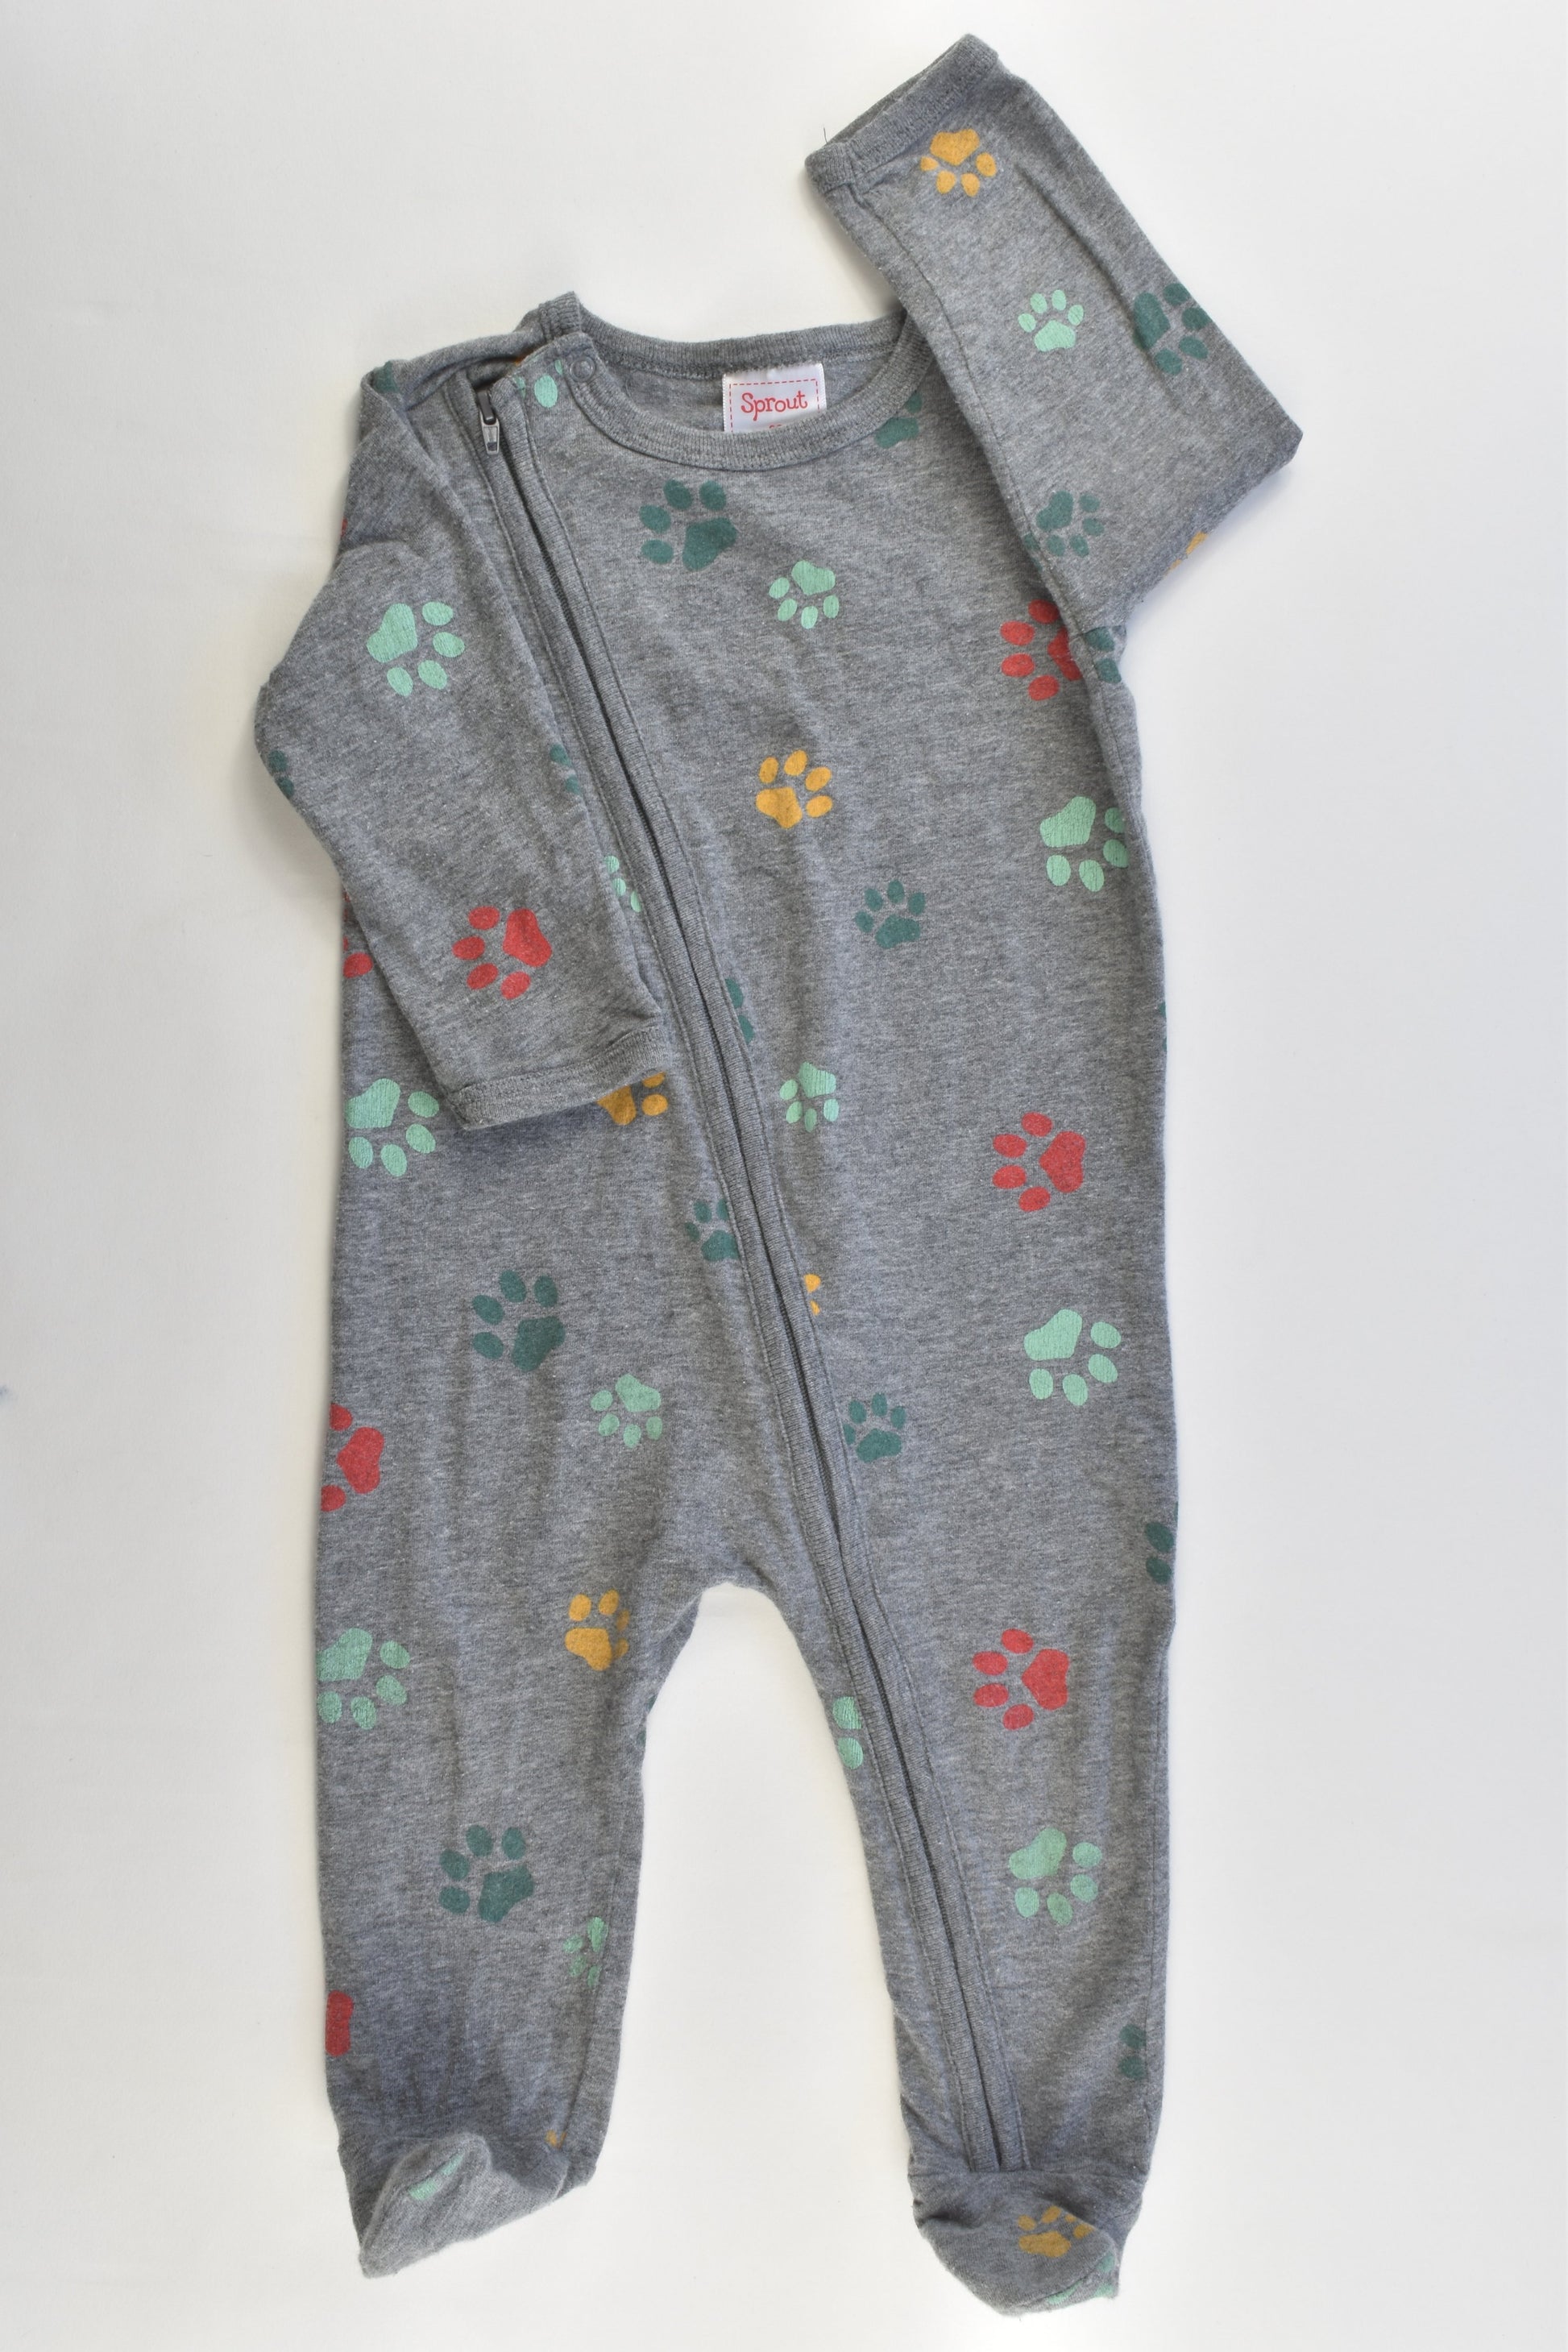 Sprout Size 00 (3-6 months) Animal Footprints Footed Romper